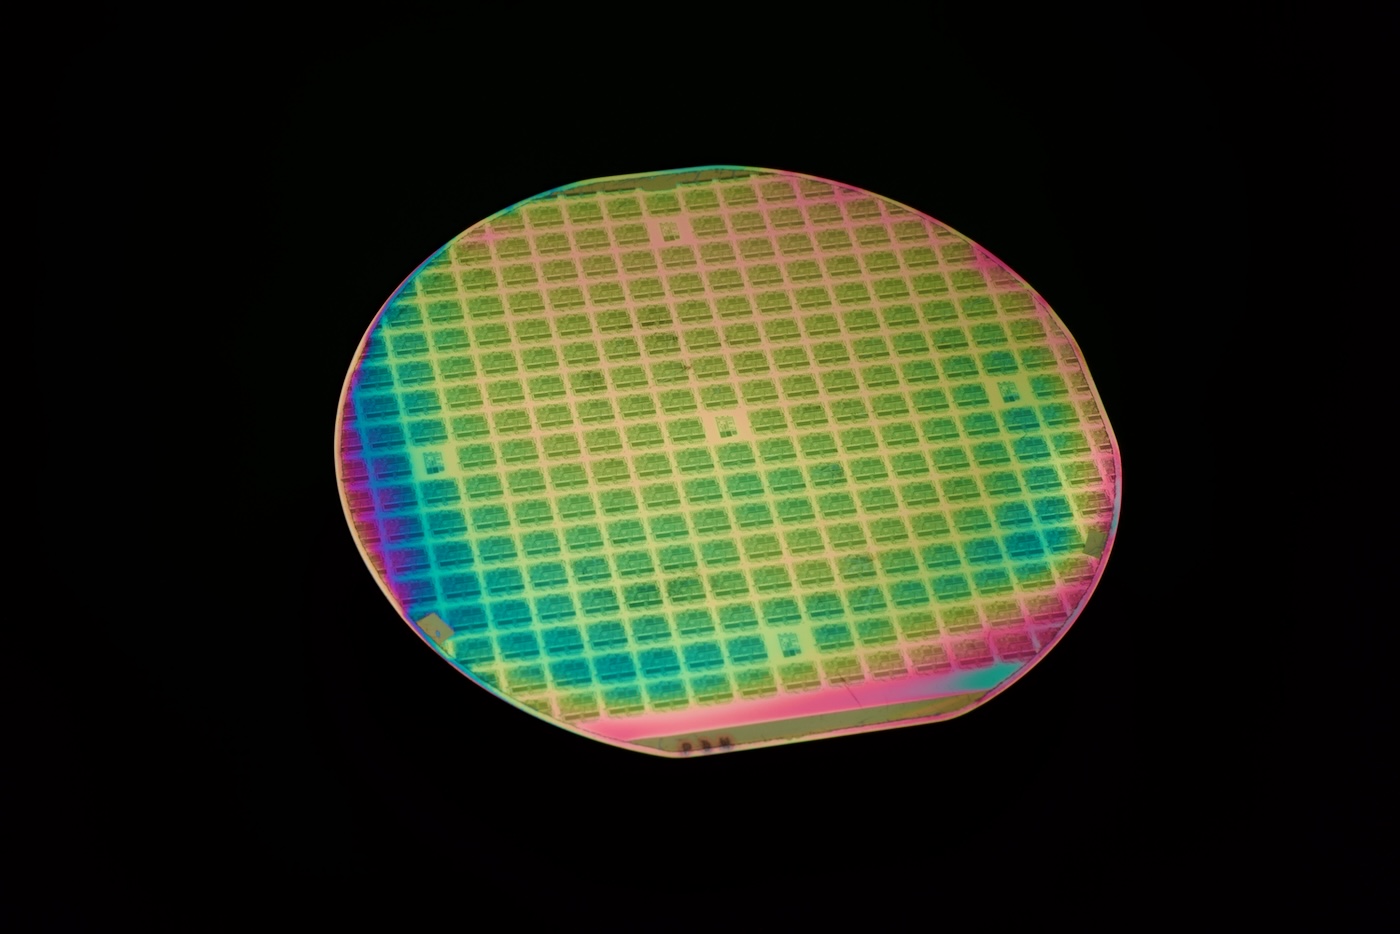 A silicon wafer from the 1980s